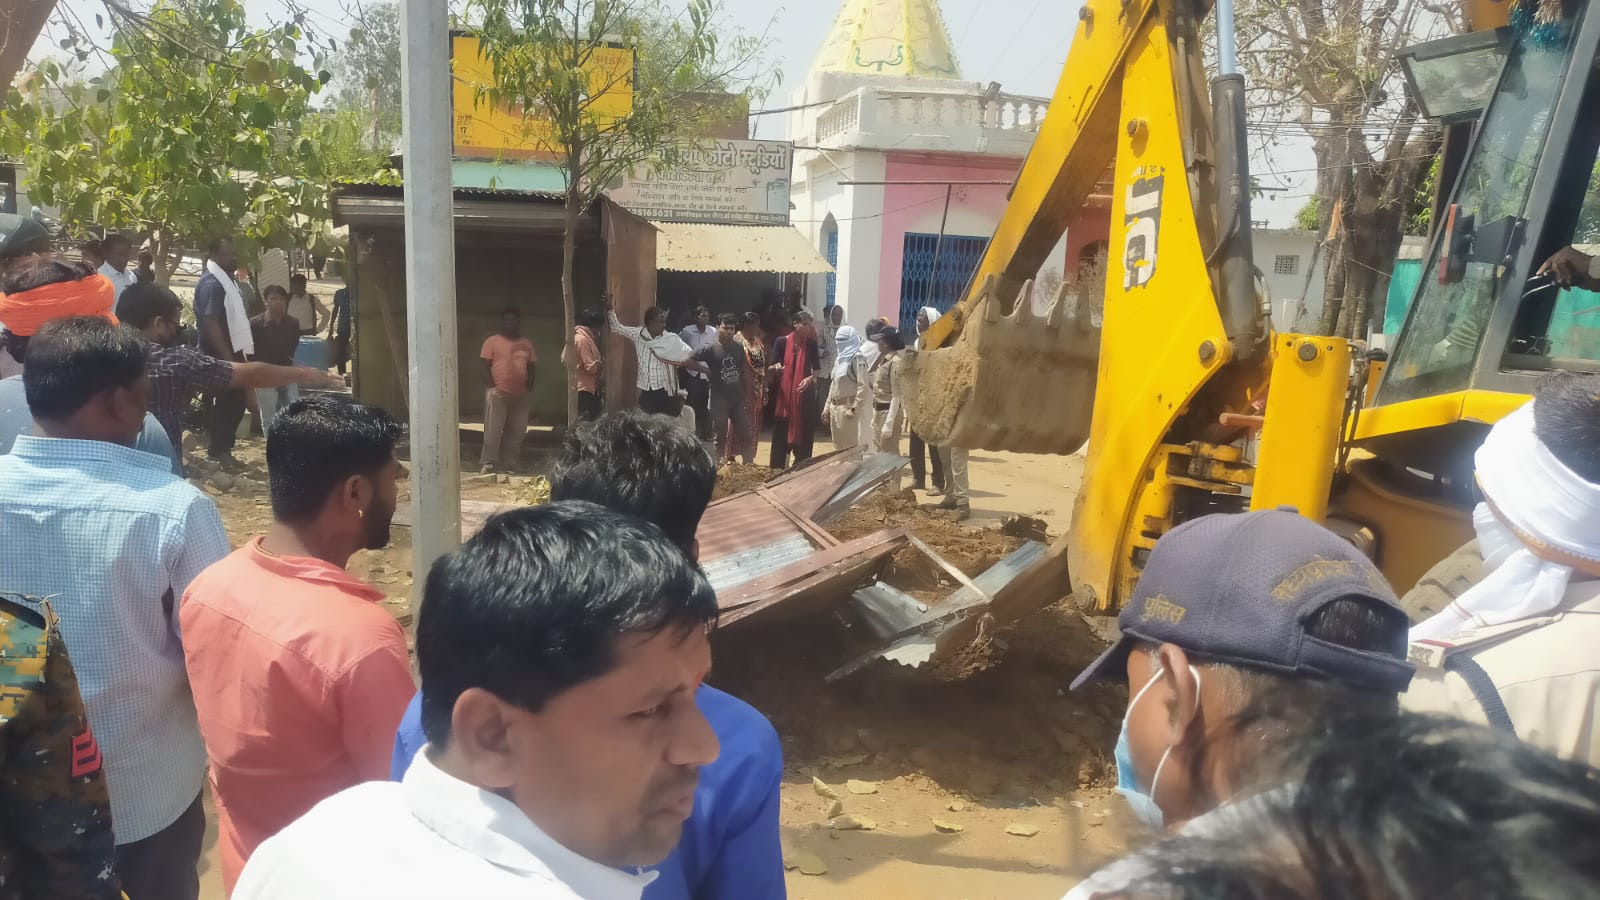 Women stopped the bulldozer, encroachment removed after the arrival of women police